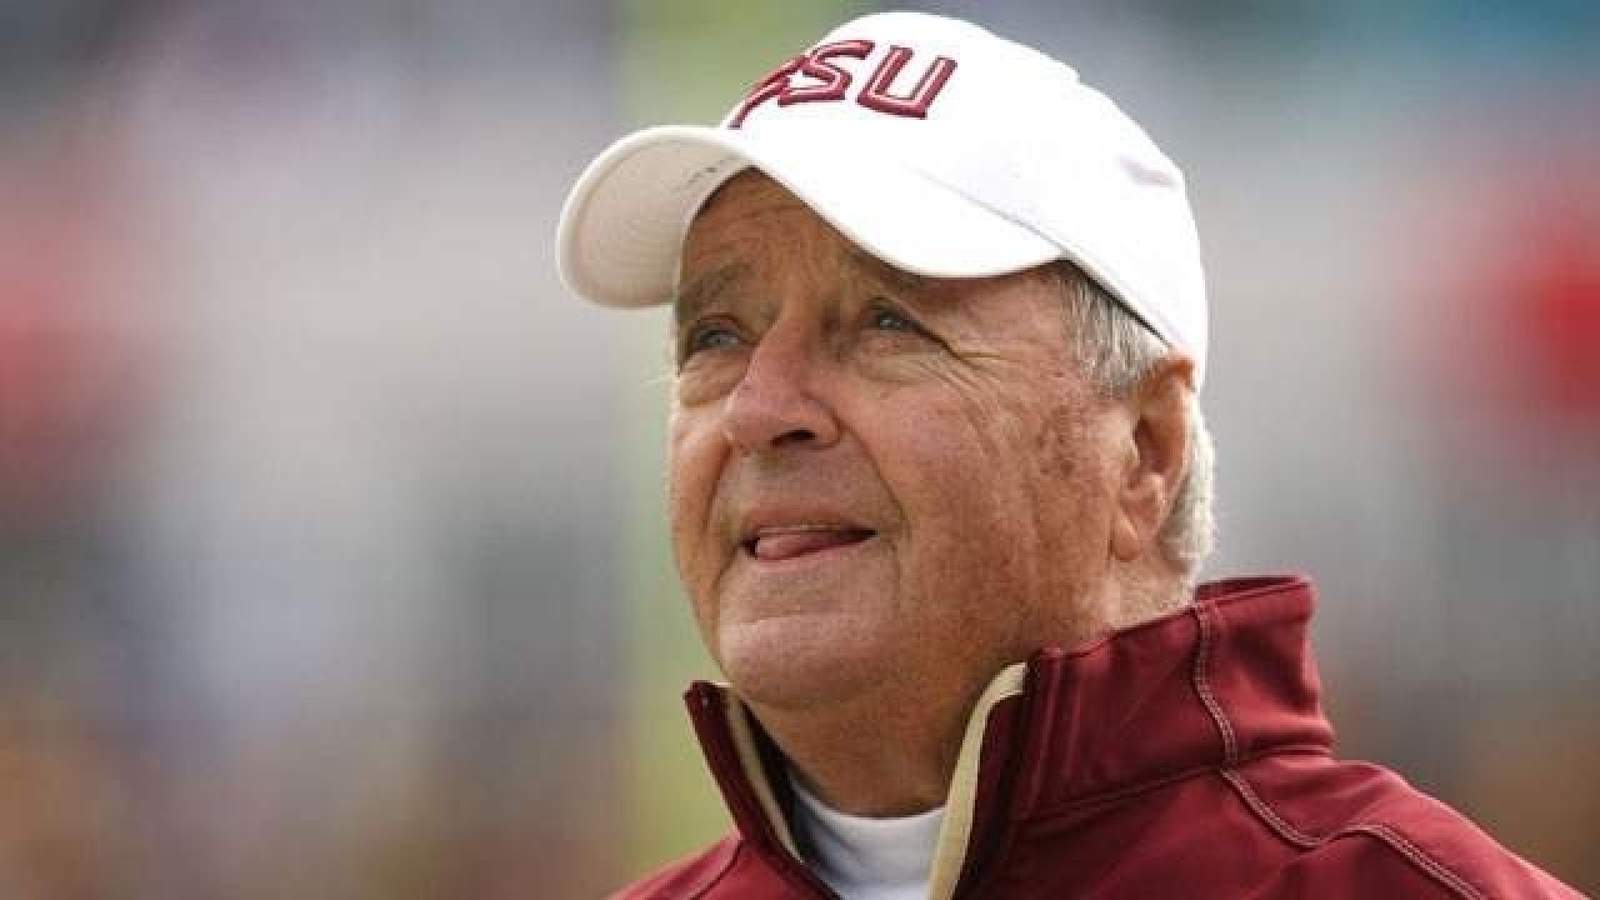 Bobby Bowden says he is improving after contracting COVID-19